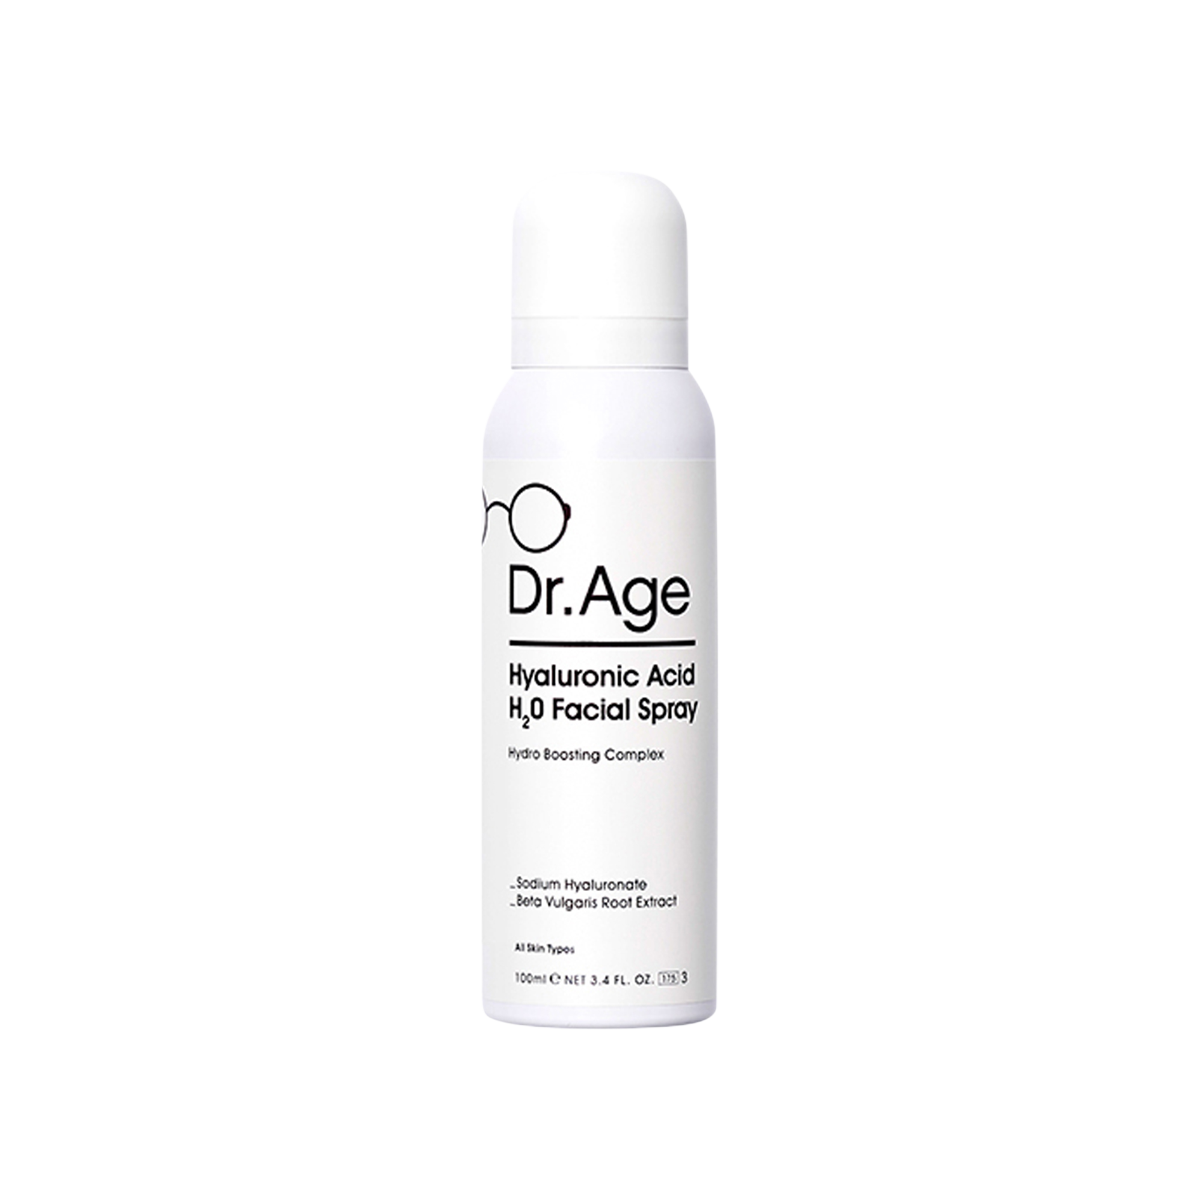 Dr. Age - Hyaluronic Acid H2O Facial Spray